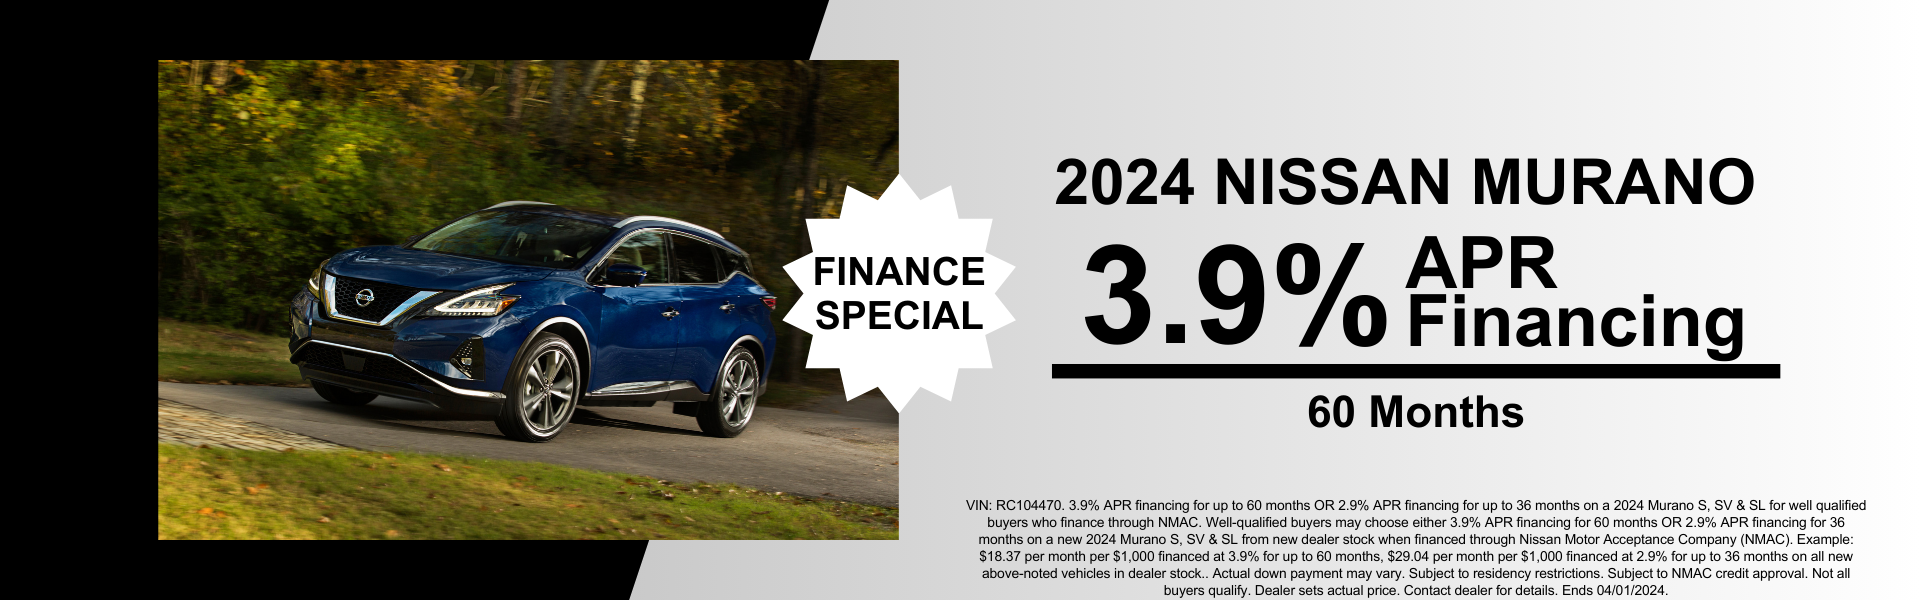 Nissan Murano Finance Special